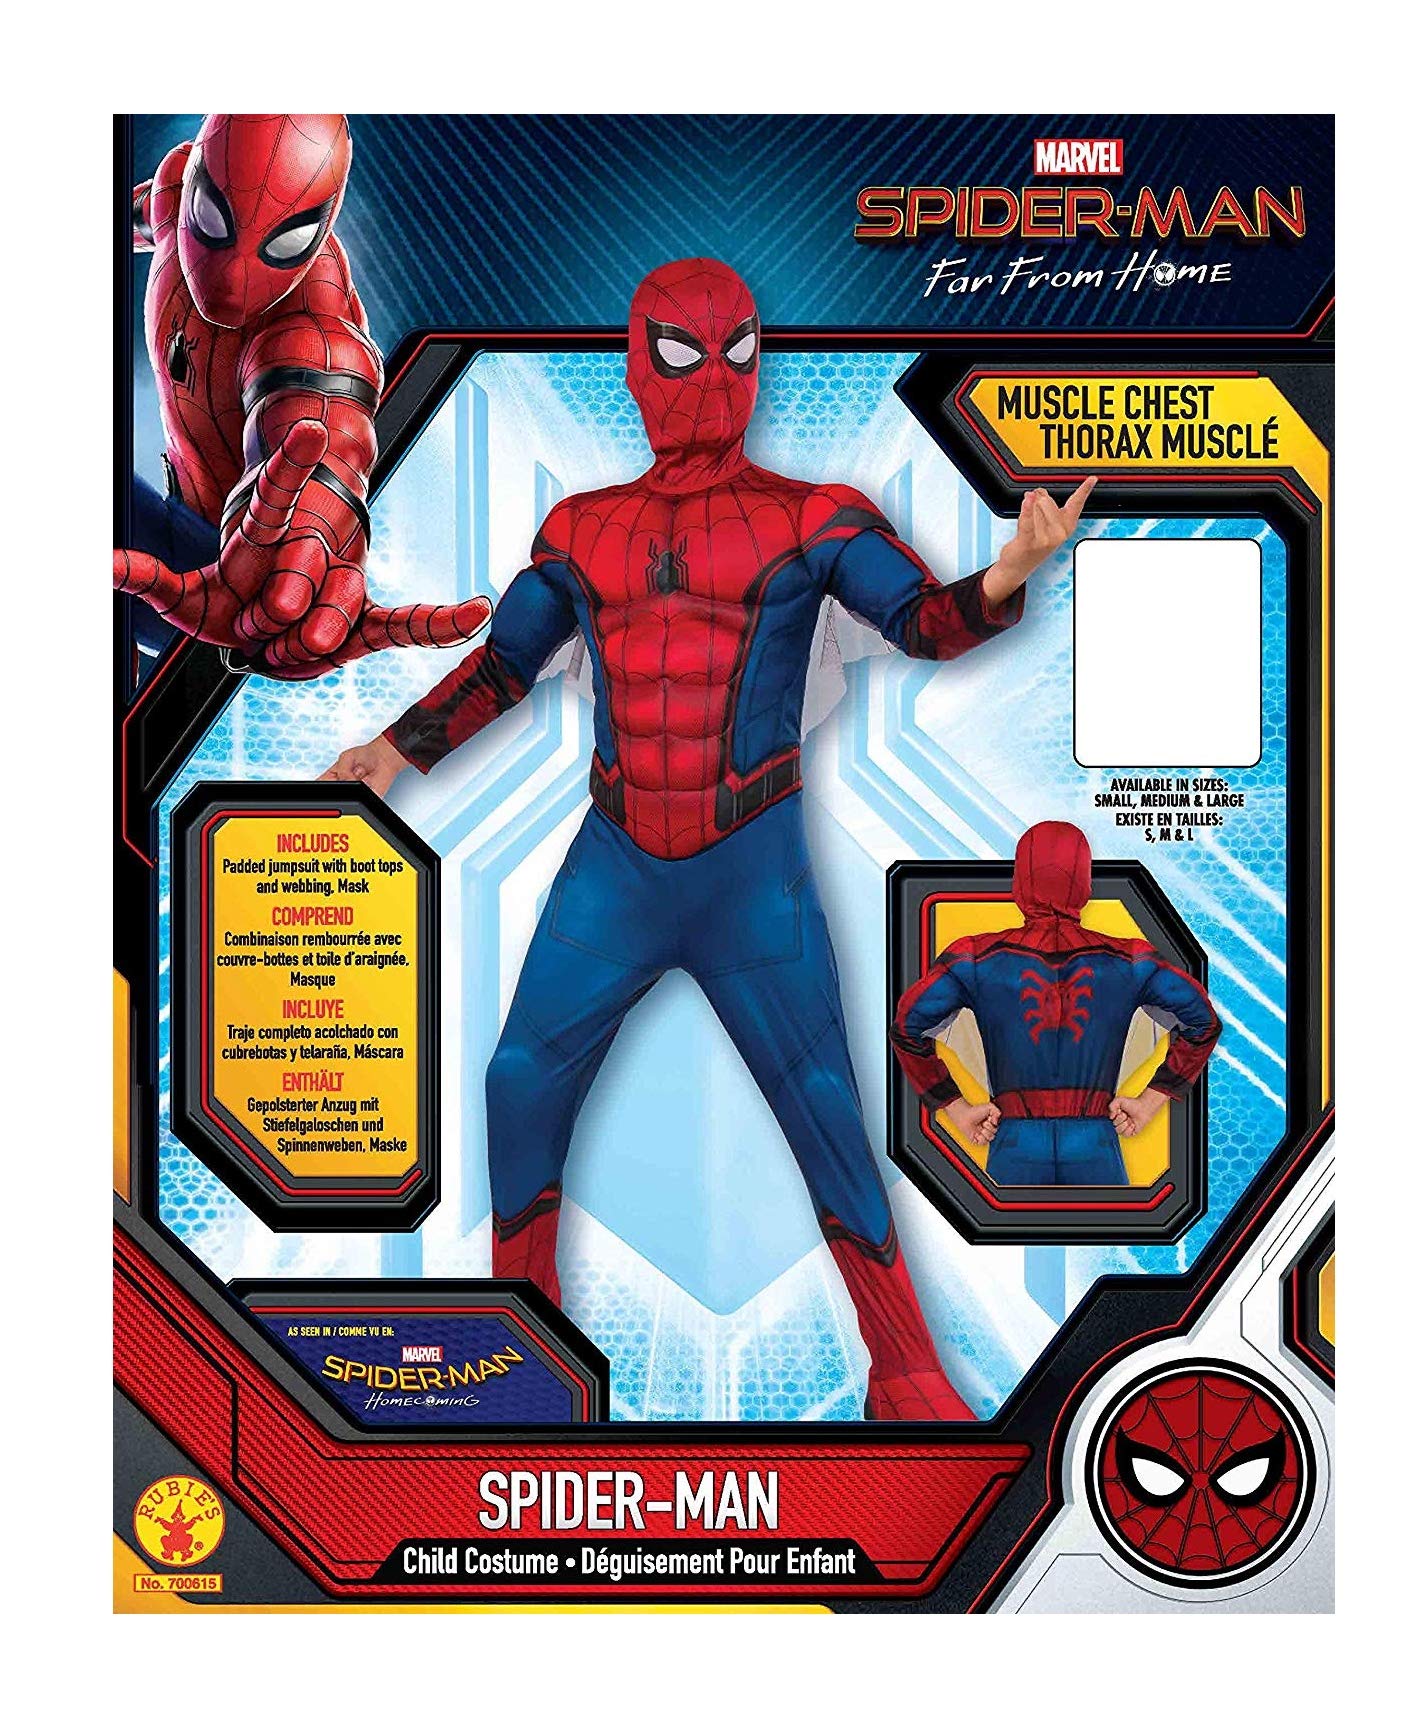 Rubie's Child's Marvel Spider-Man Far from Home Deluxe Spider-Man Costume & Mask, Large, Red/Blue